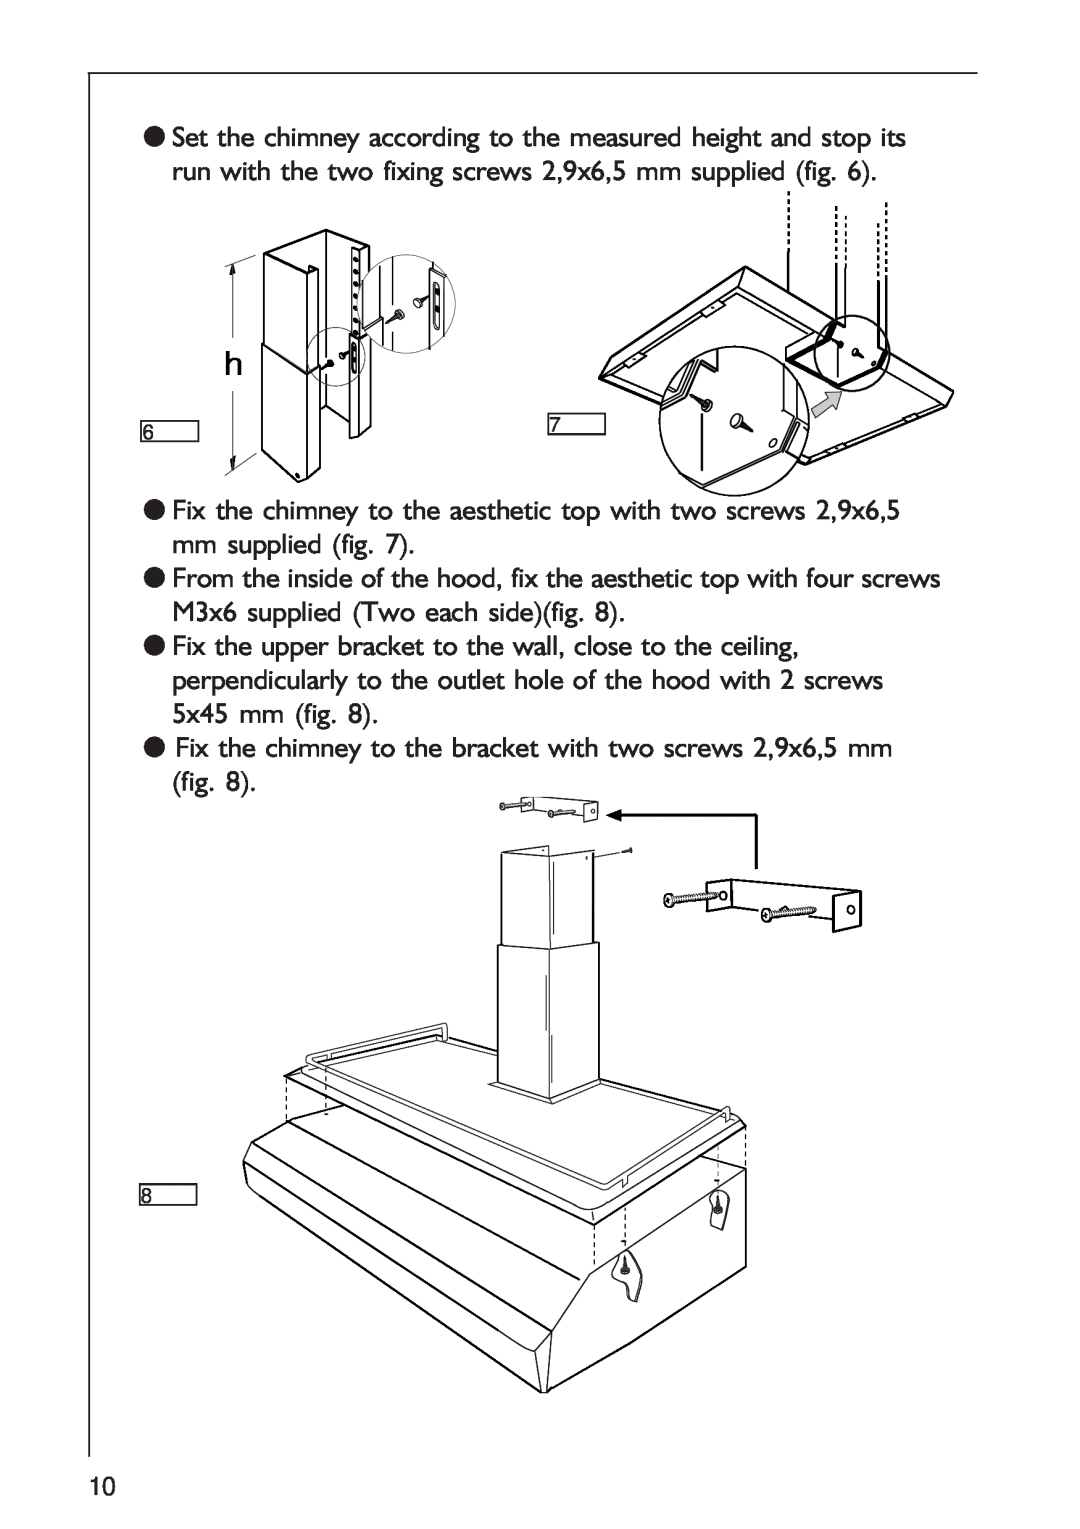 AEG 125 D manual Fix the chimney to the bracket with two screws 2,9x6,5 mm fig 